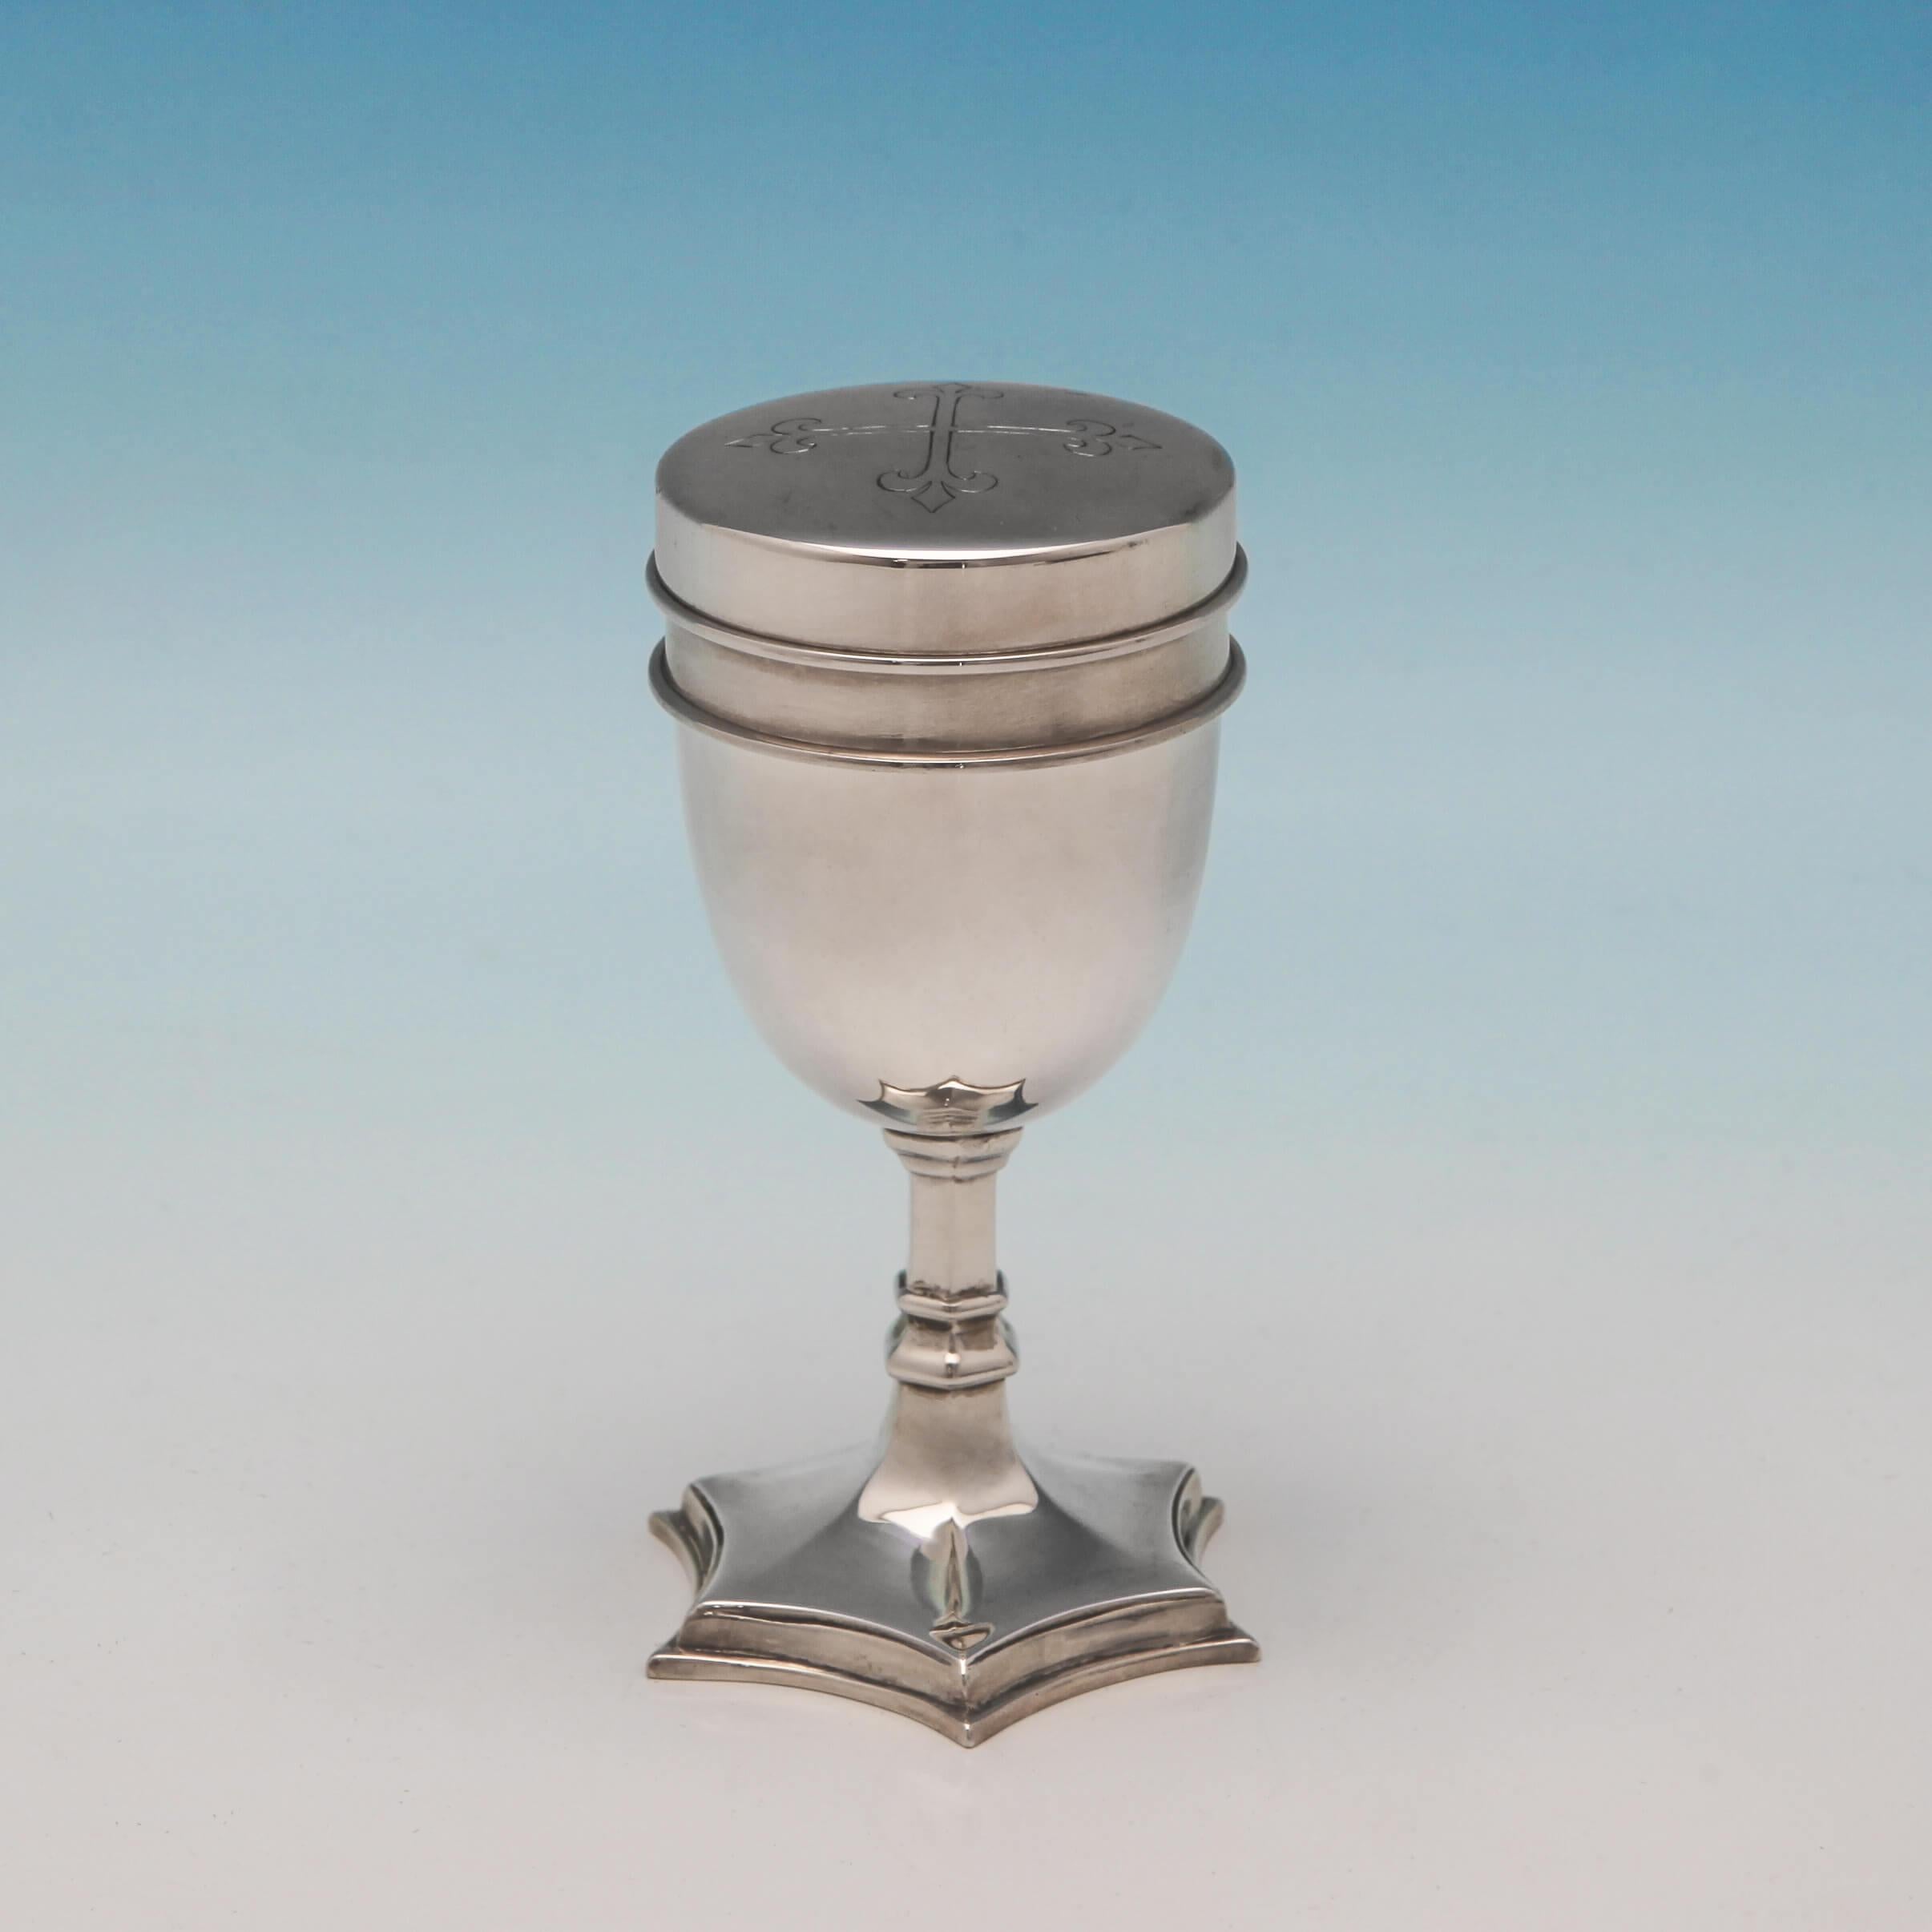 Hallmarked in London in 1929 by J. Wippell & Co. Ltd. This handsome, George V, sterling silver travelling communion set, comprises a chalice, and fitted pyx, in its original box. The chalice measures 3